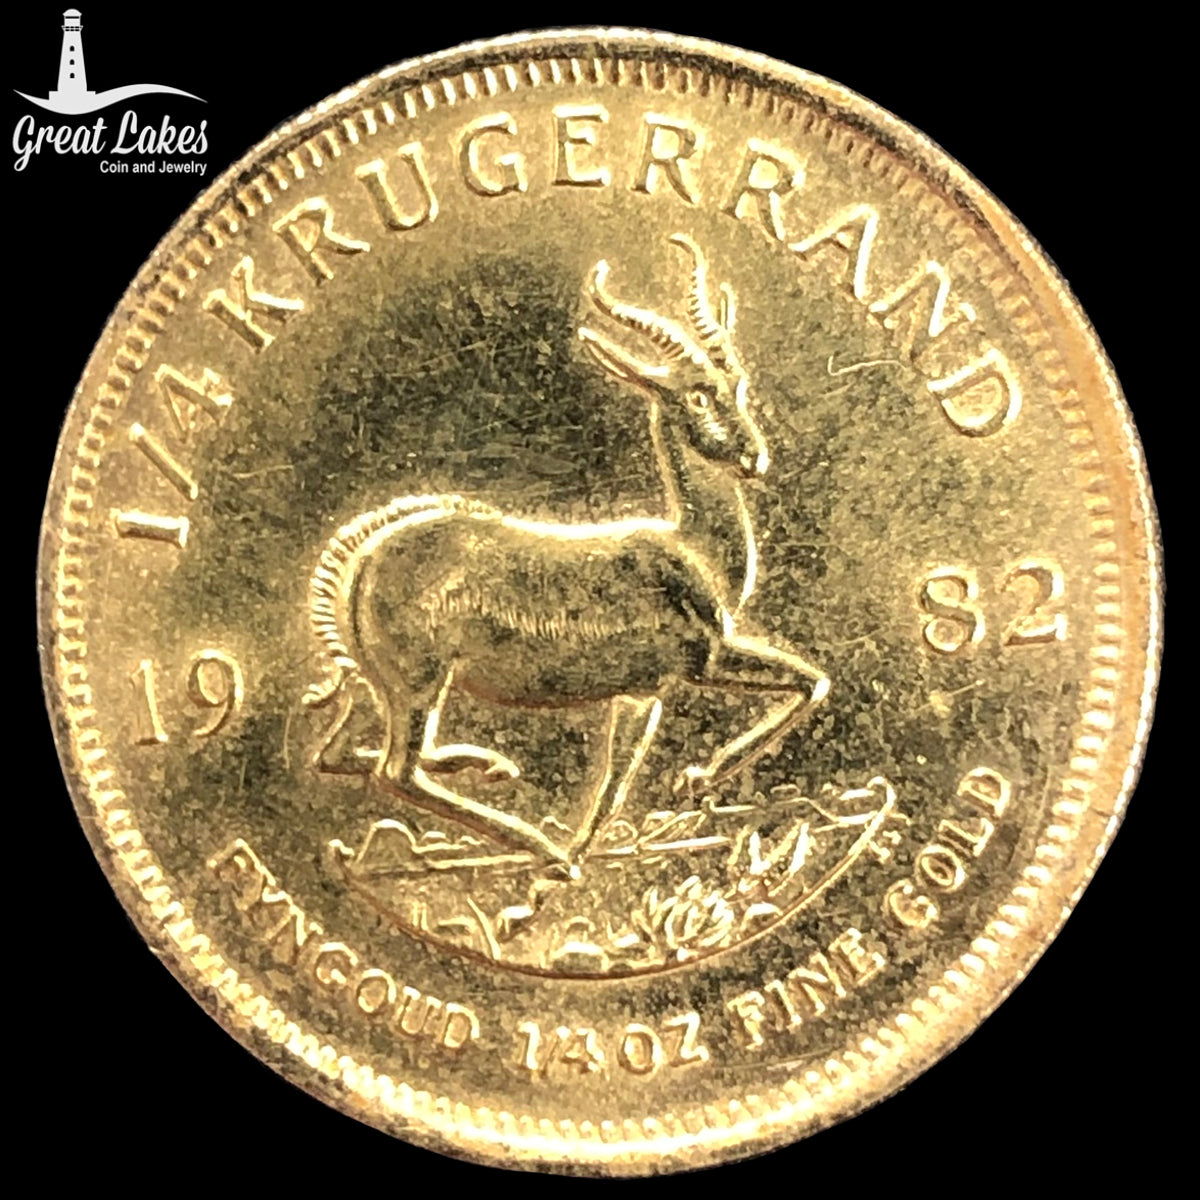 1982 South African 1/4 oz Gold Krugerrand (Ex Jewelry)